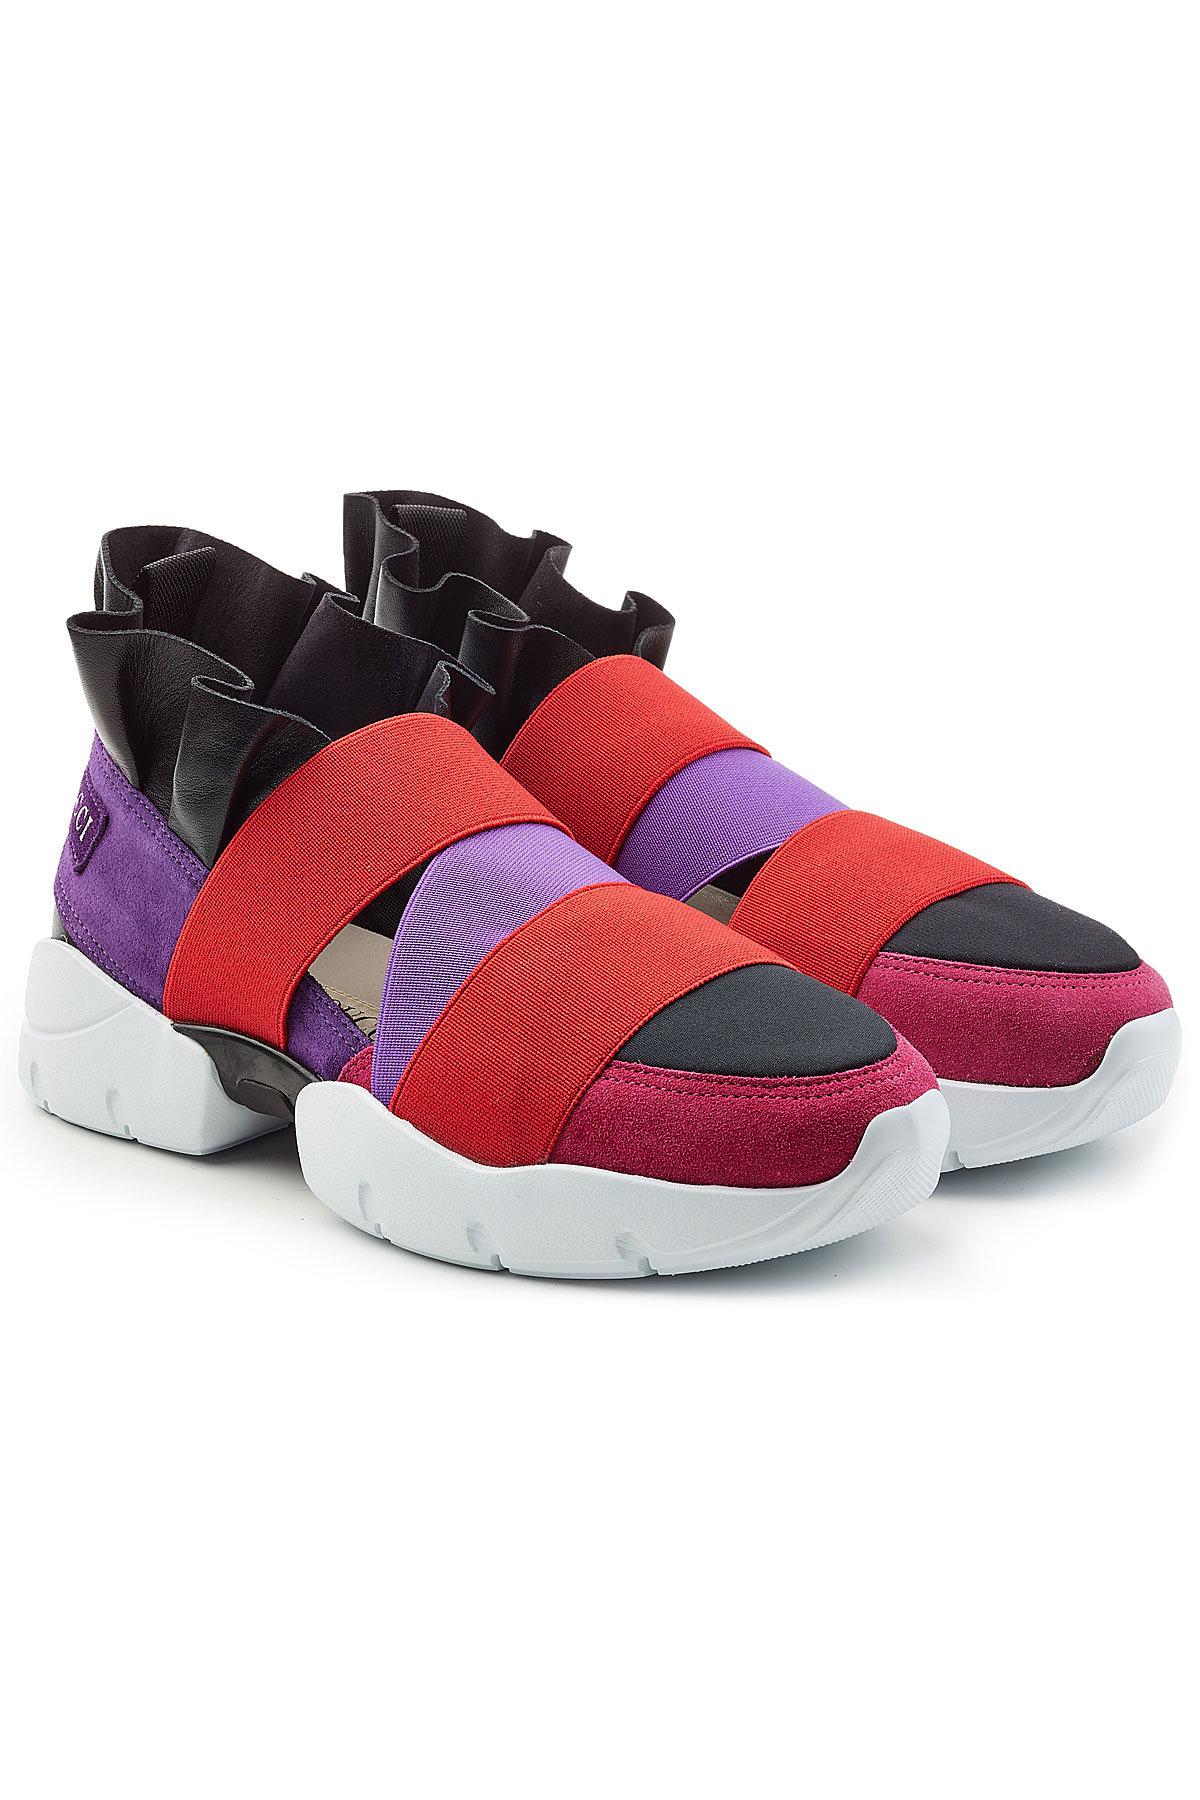 Lyst - Emilio pucci Ruffle Sneakers With Suede